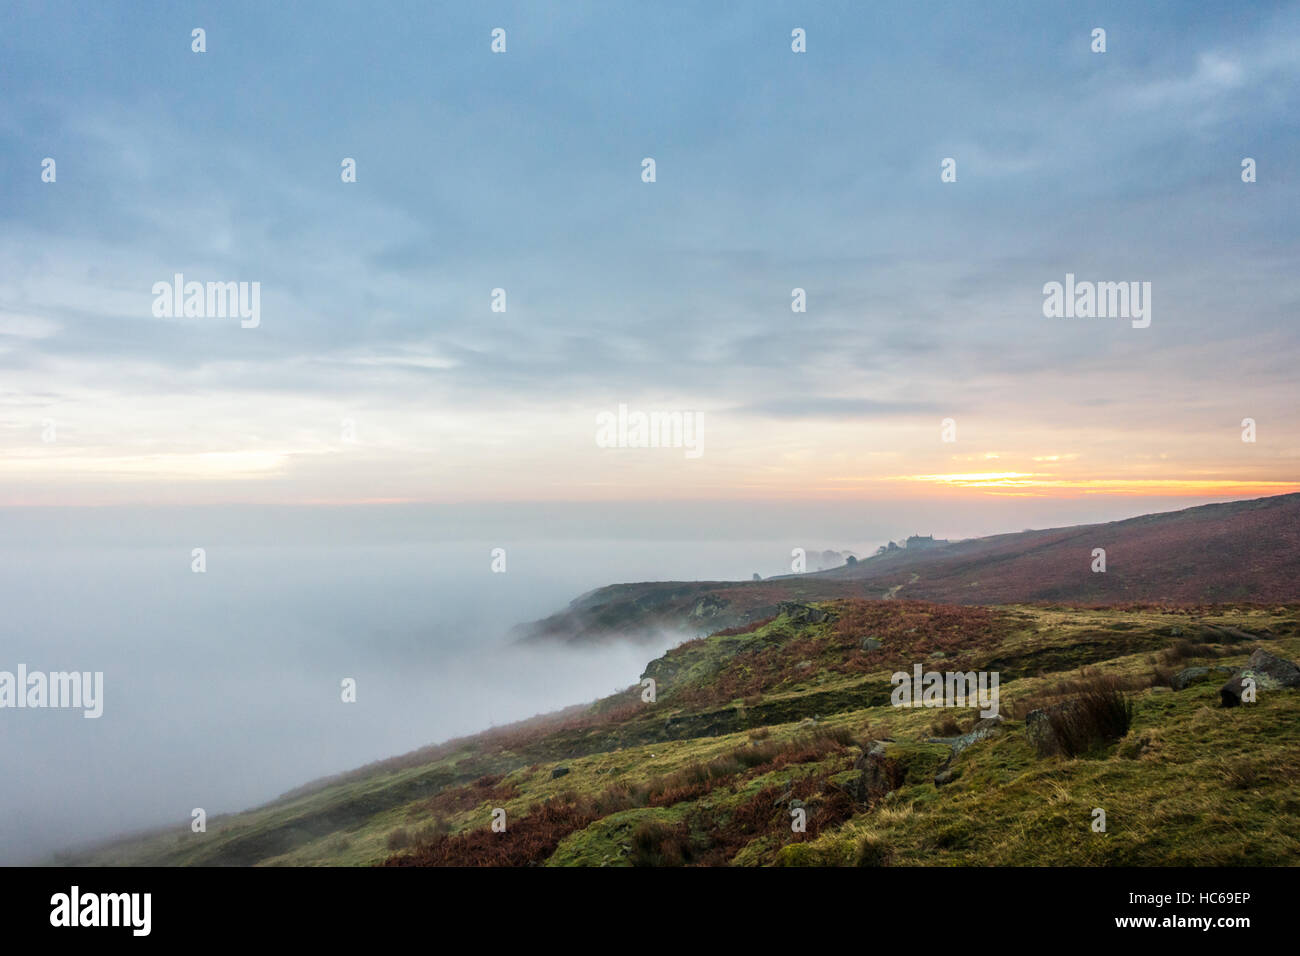 Cloud inversion looking like a seascape in the Wharfedale valley, near Ilkley, West Yorkshire, England, UK Stock Photo